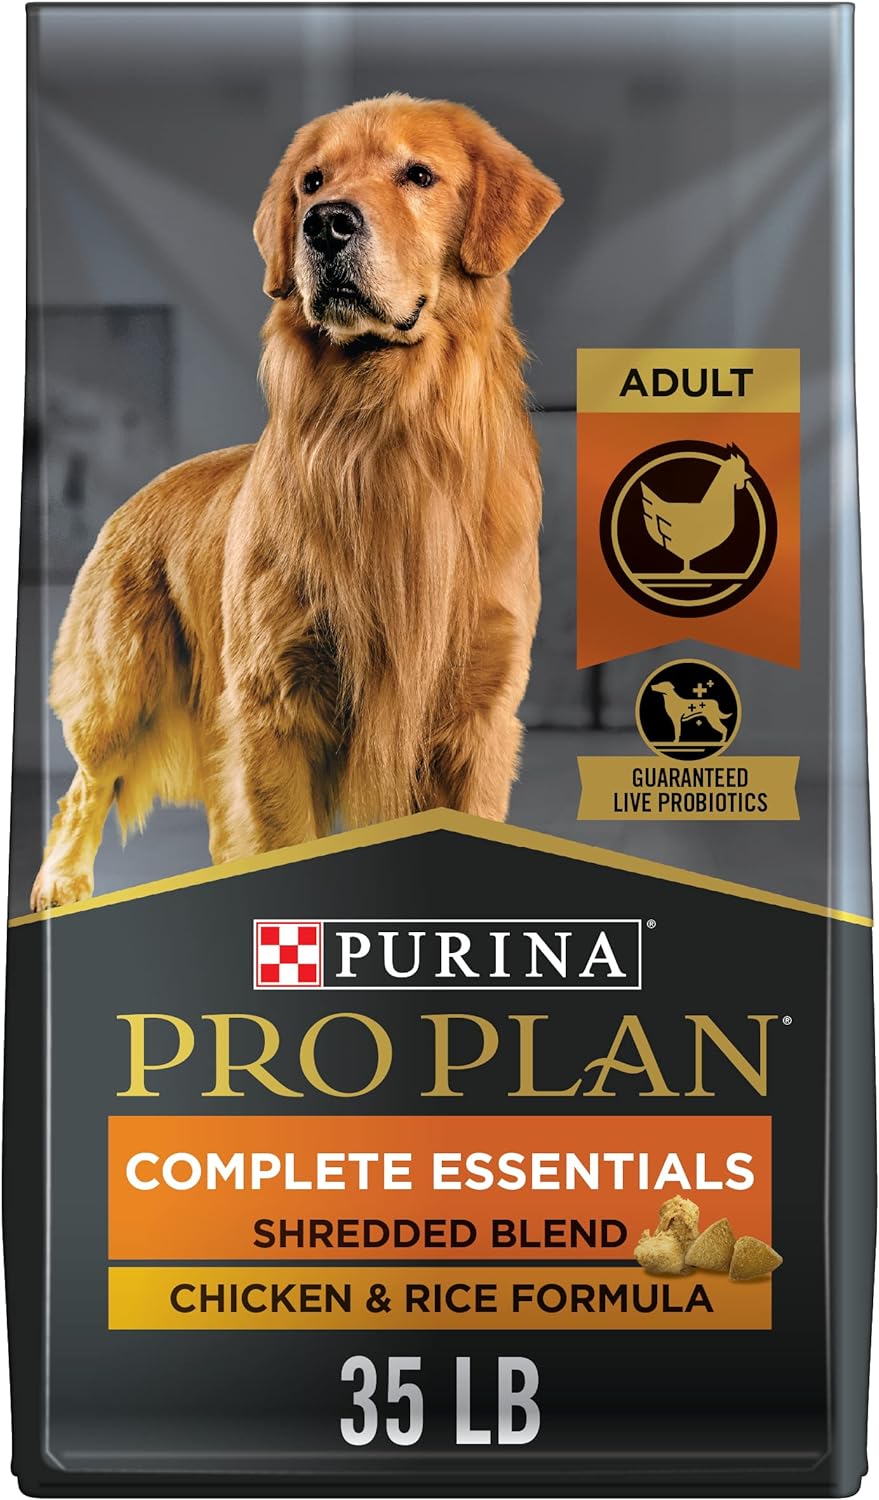 Purina Pro Plan High Protein Dog Food With Probiotics